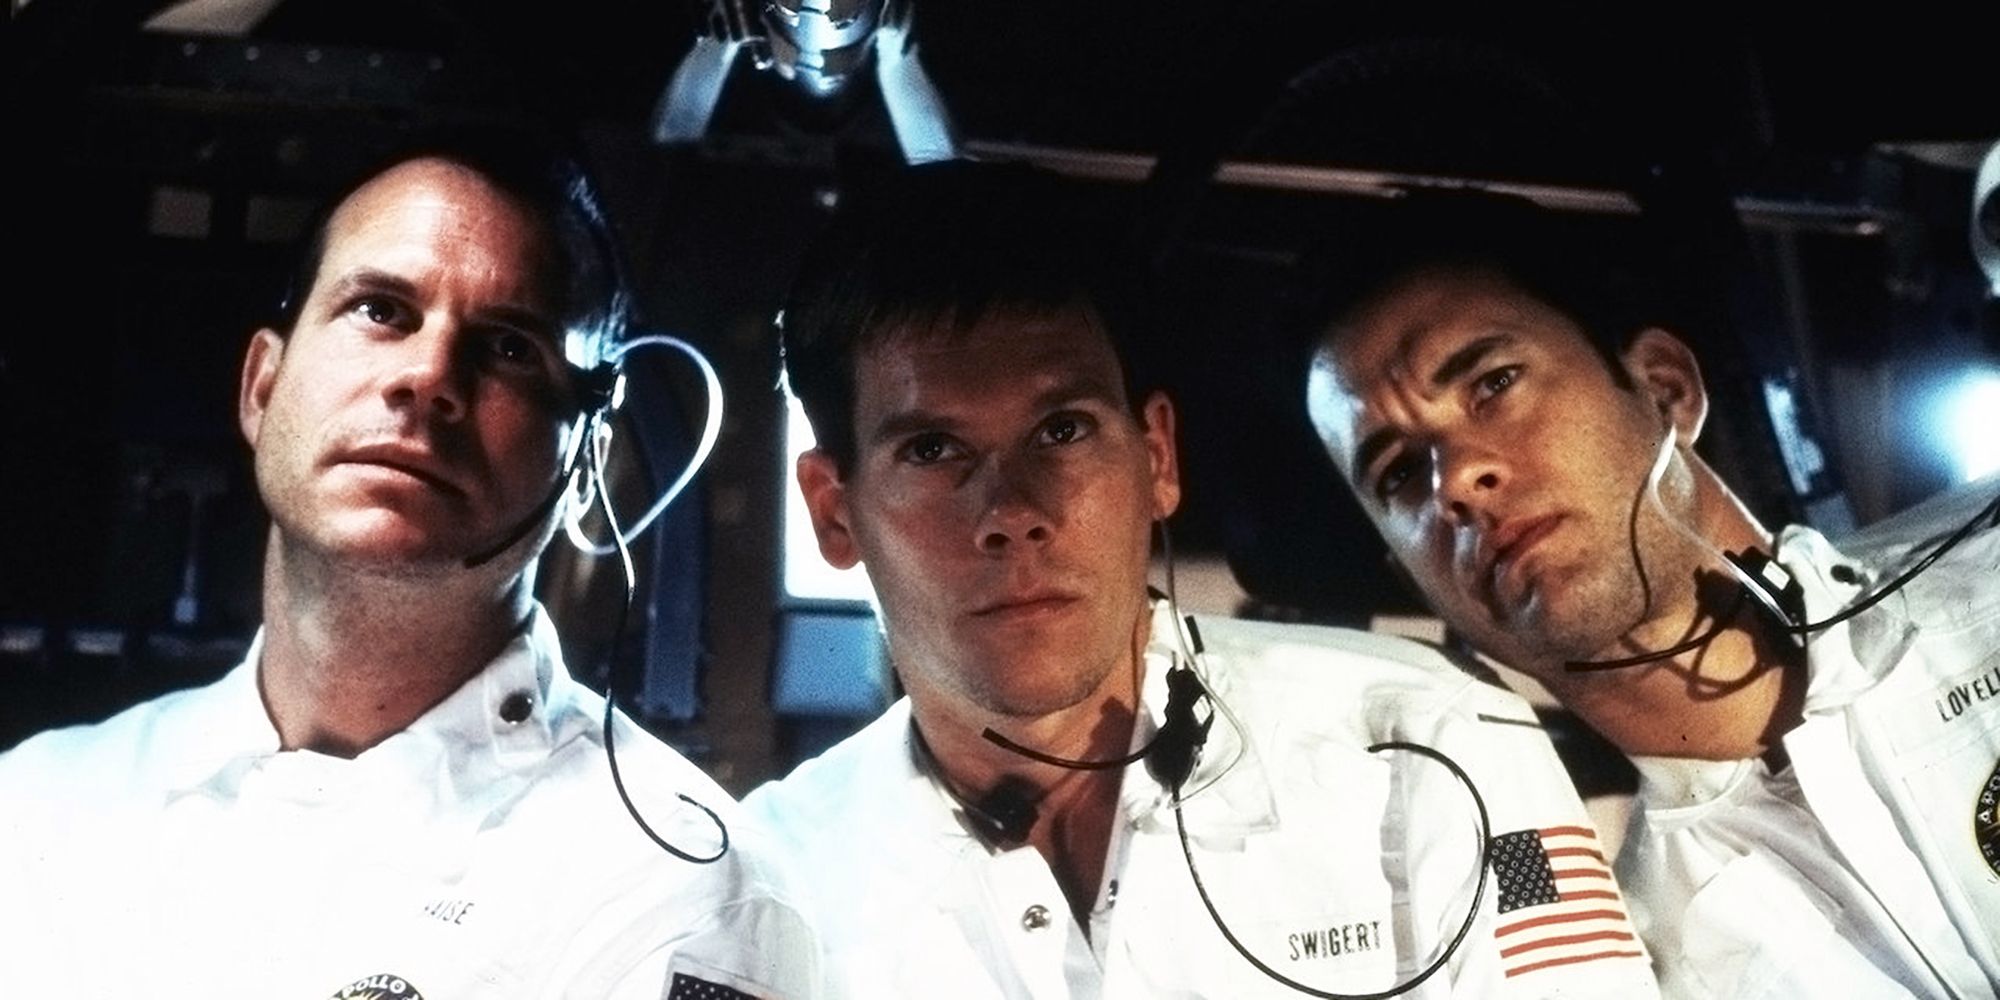 Bill Paxton, Kevin Bacon and Tom Hanks aboard the Apollo 13 spacecraft